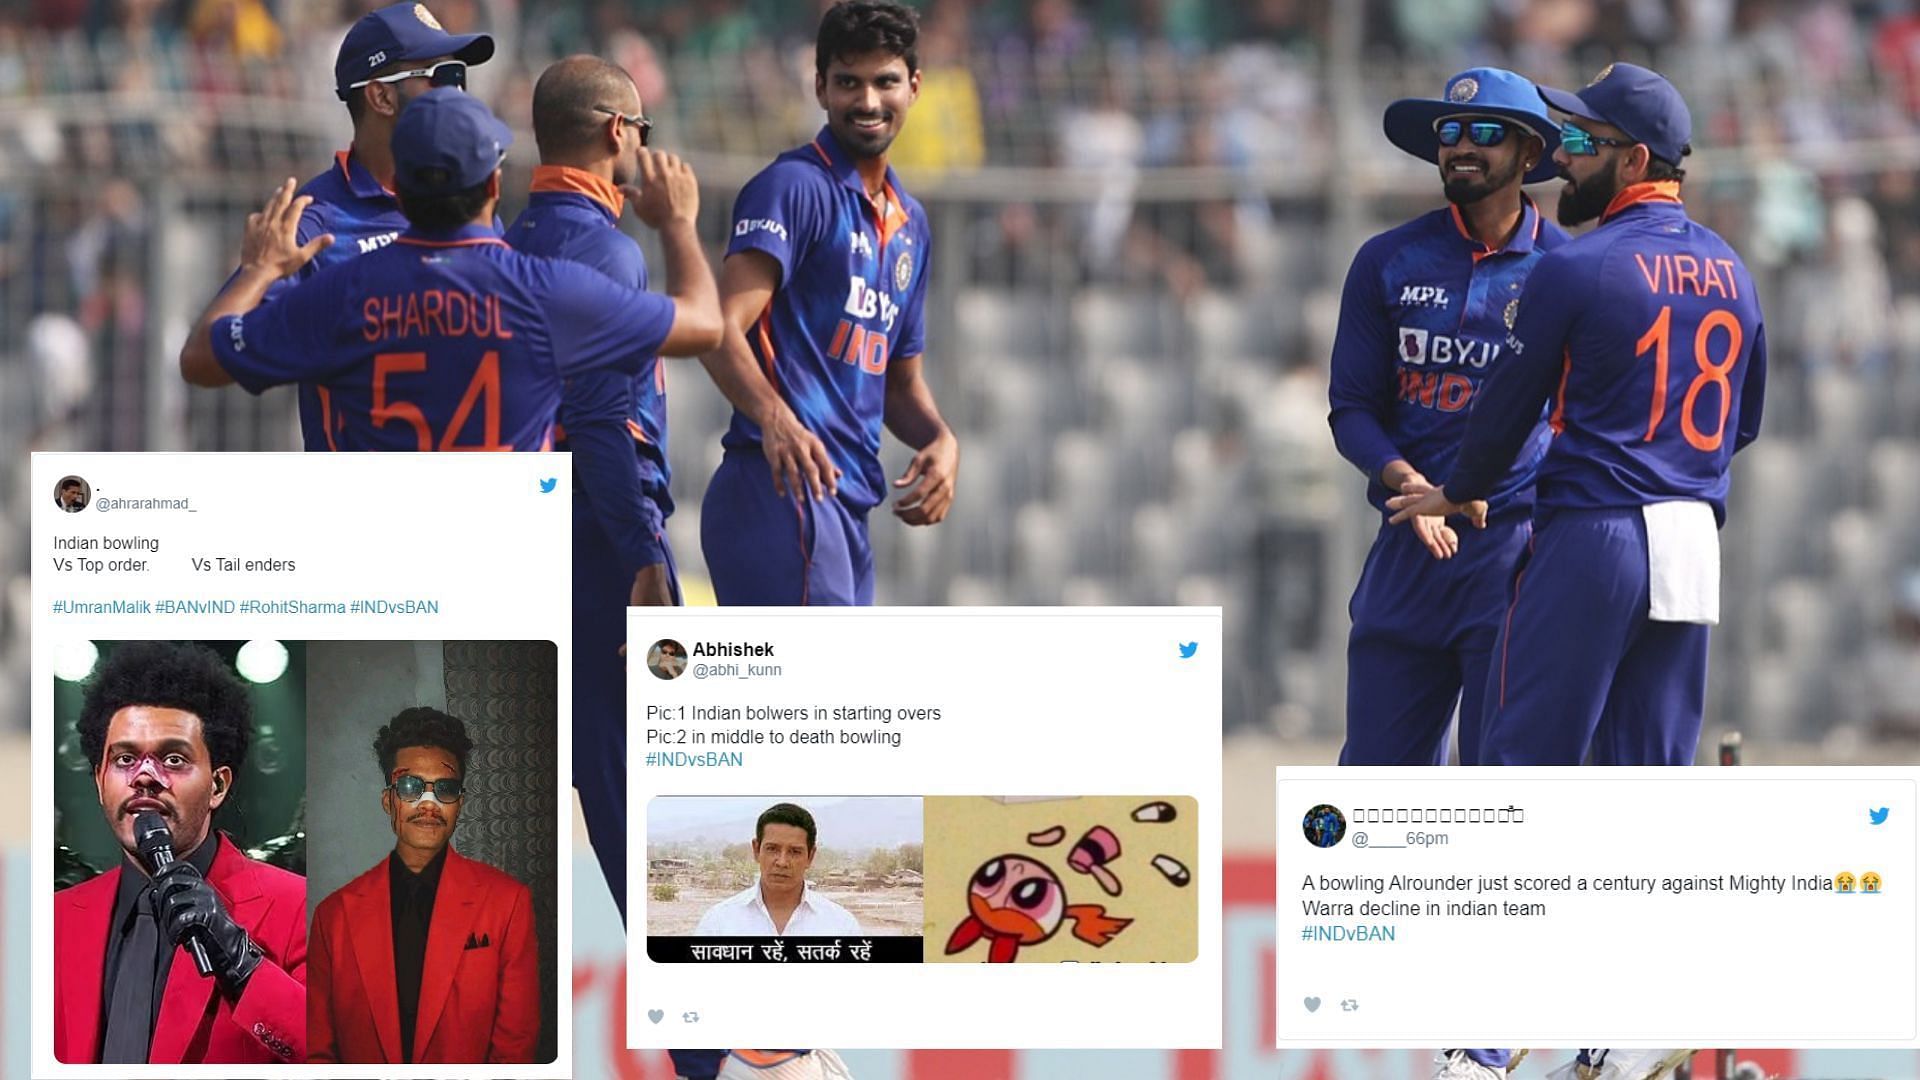 &quot;Absolute mockery of the Indian bowling lineup&quot; - Twitterati fume at Men in Blue